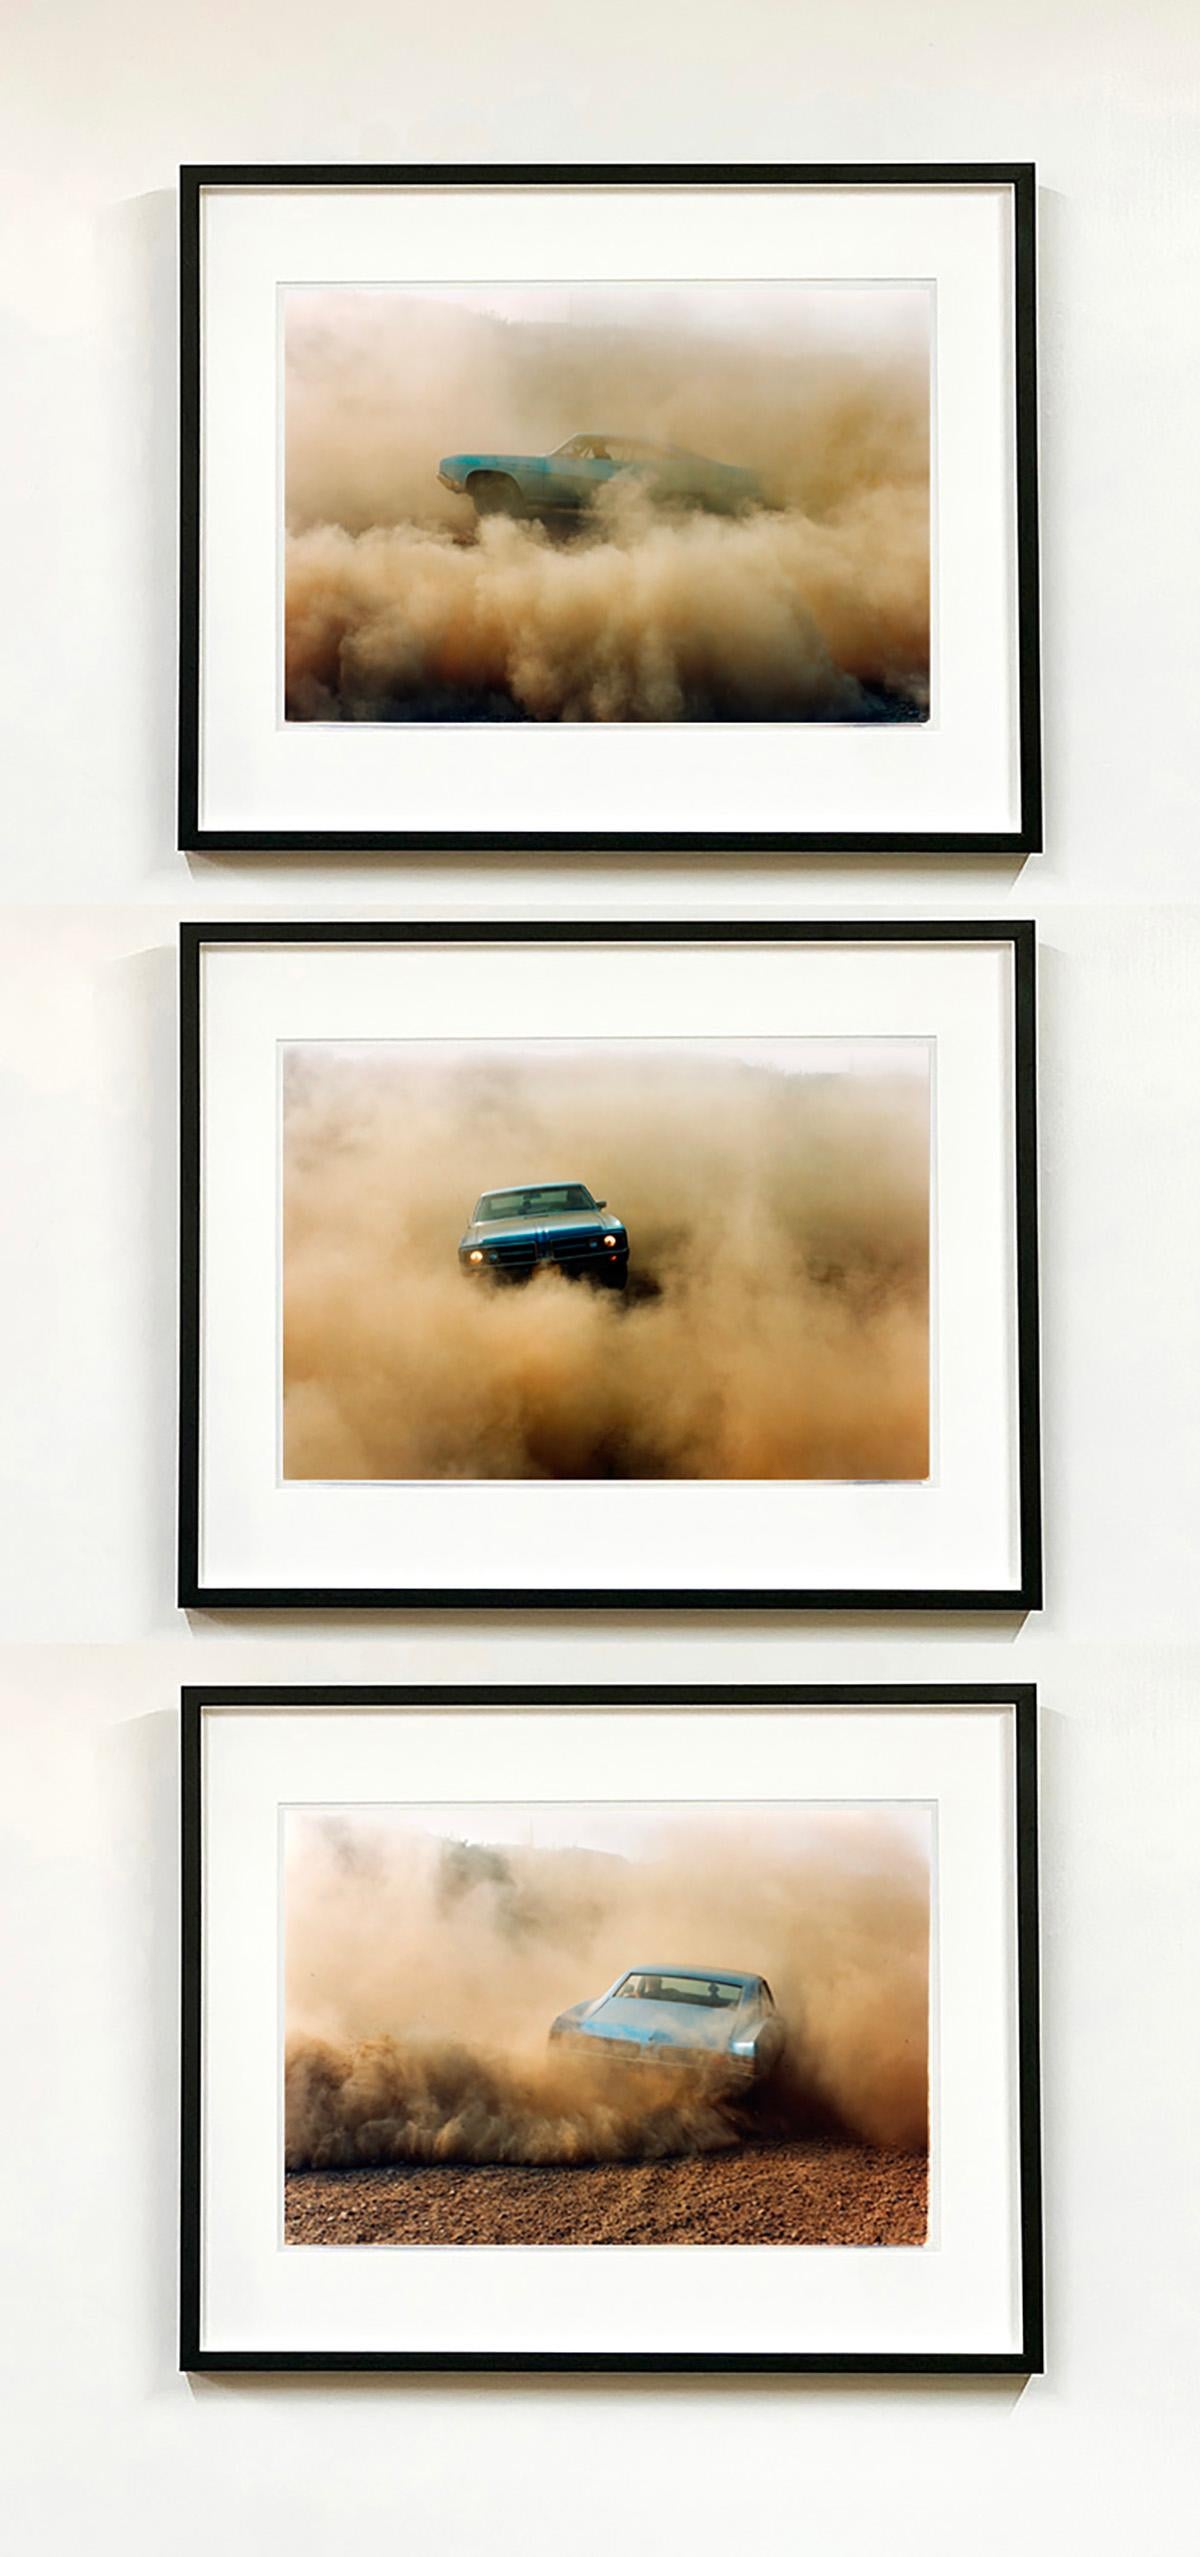 Buick in the Dust, this photography series features an American Car, on a British Beach (Hemsby, Norfolk) driven by a German. Richard spent years honing his skills as a drag racing photographer, a sport he loves which lead his photography career on